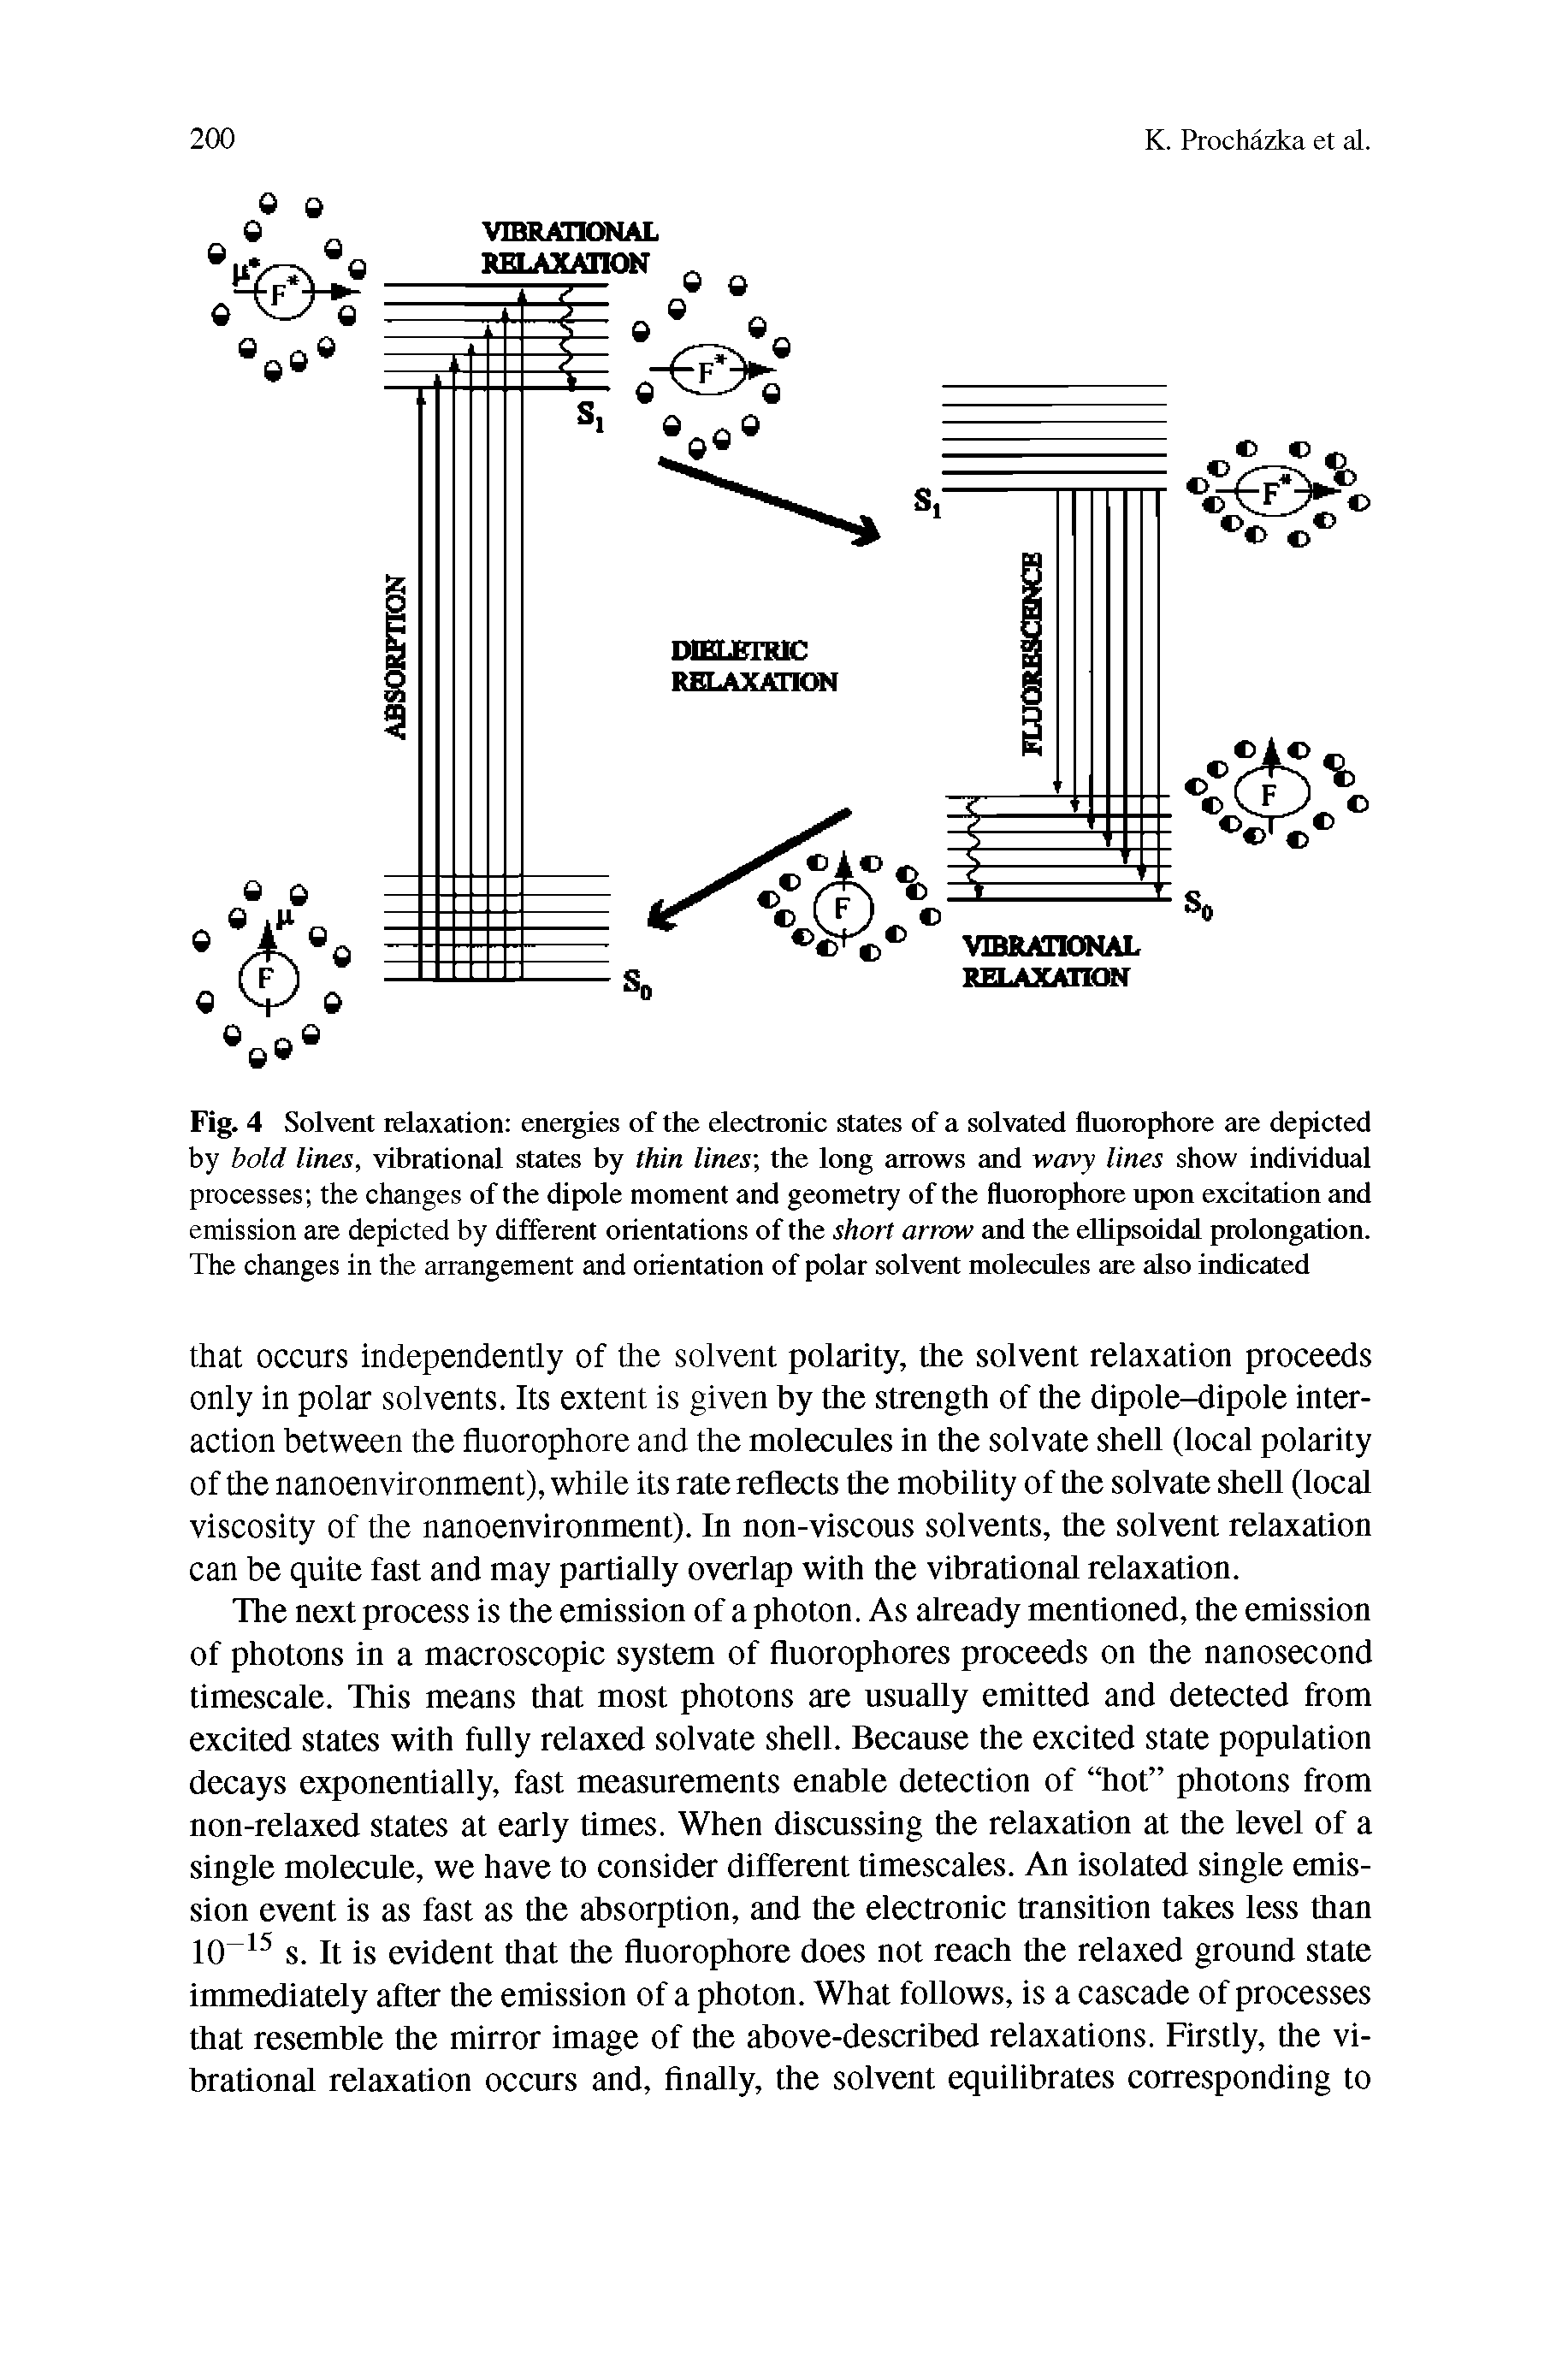 Fig. 4 Solvent relaxation energies of the electronic states of a solvated fluoiophore are depicted by bold lines, vibrational states by thin lines-, the long arrows and wavy lines show individutil processes the changes of the dipole moment and geometry of the fluorophore upon excitation and emission are depicted by different orientations of the short arrow and the ellipsoidal prolongation. The changes in the arrangement and orientation of polar solvent molecules are also indicated...